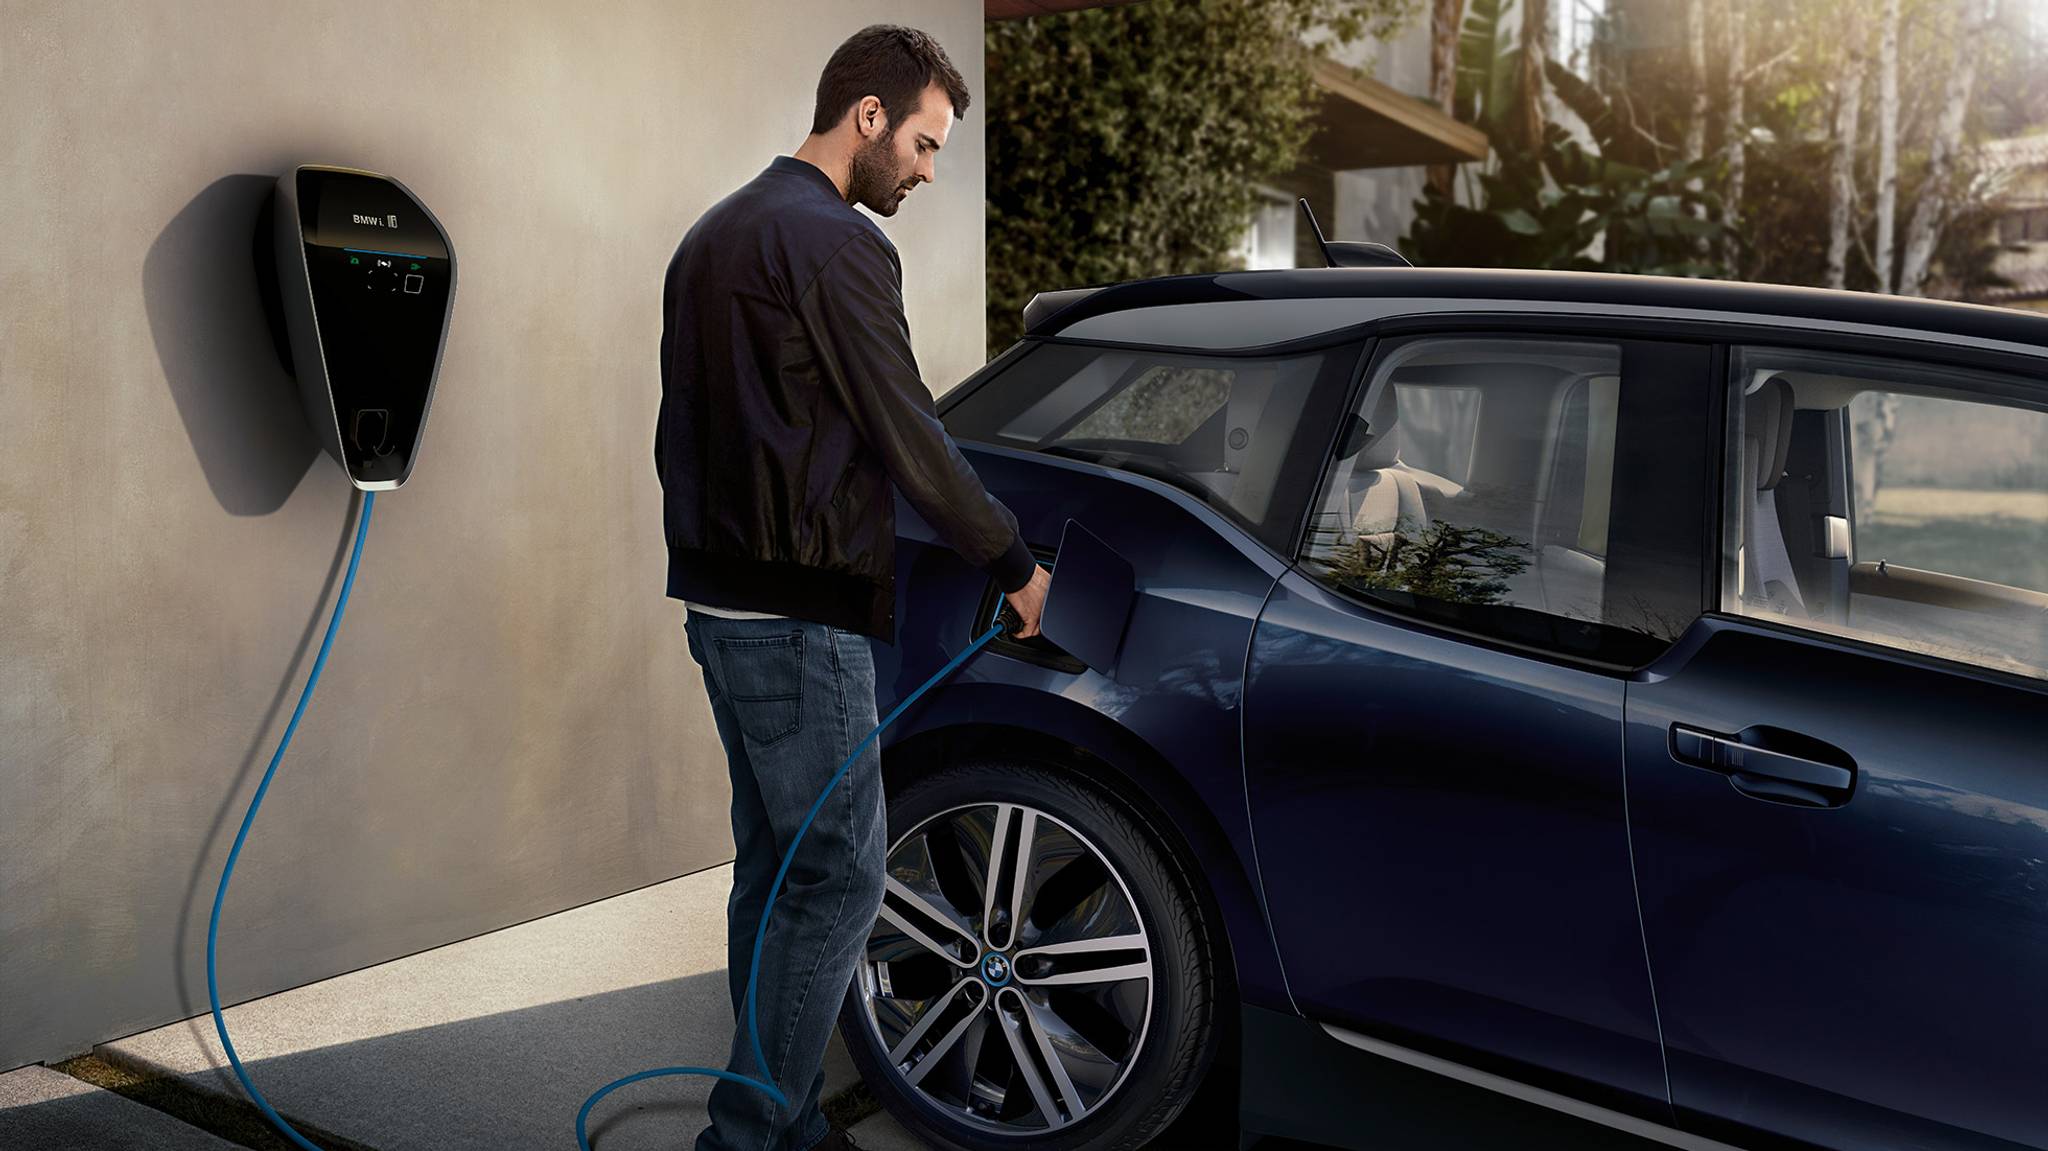 What’s shifting attitudes to electric vehicles?